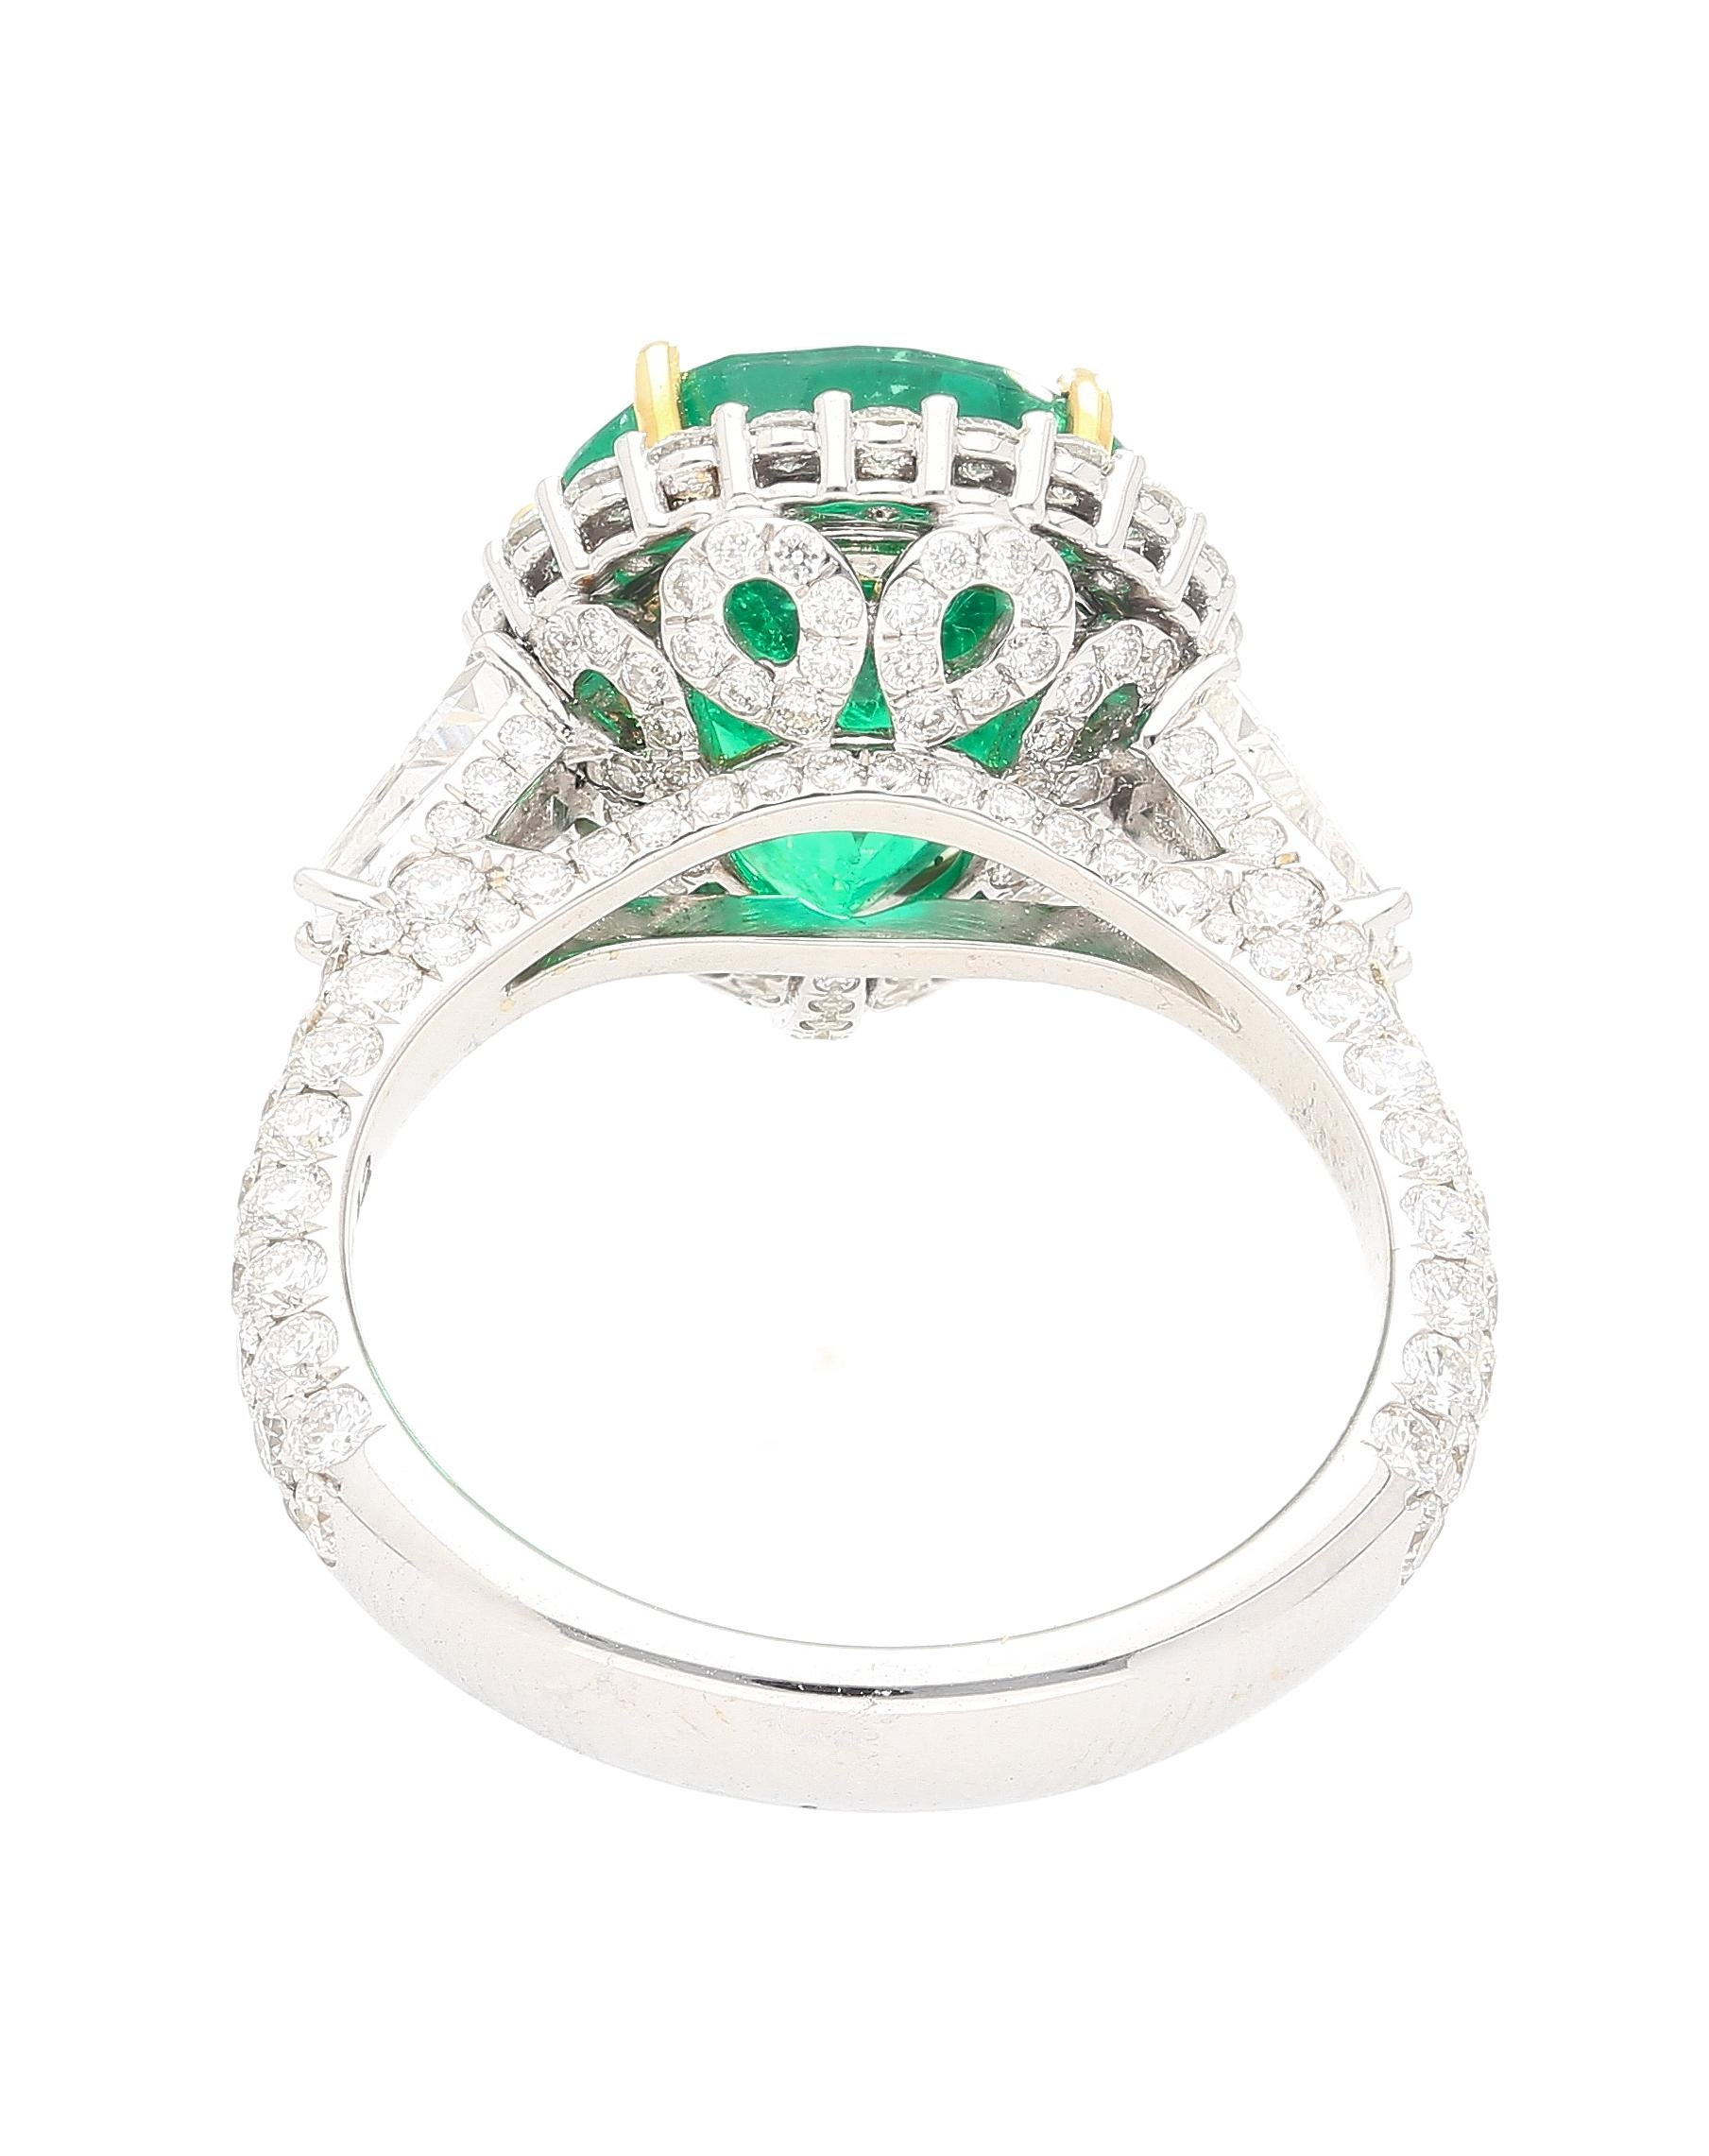 Women's 5.12 Carat Vivid Green Pear Cut Colombian Emerald and Diamond Ring in 18K Gold For Sale